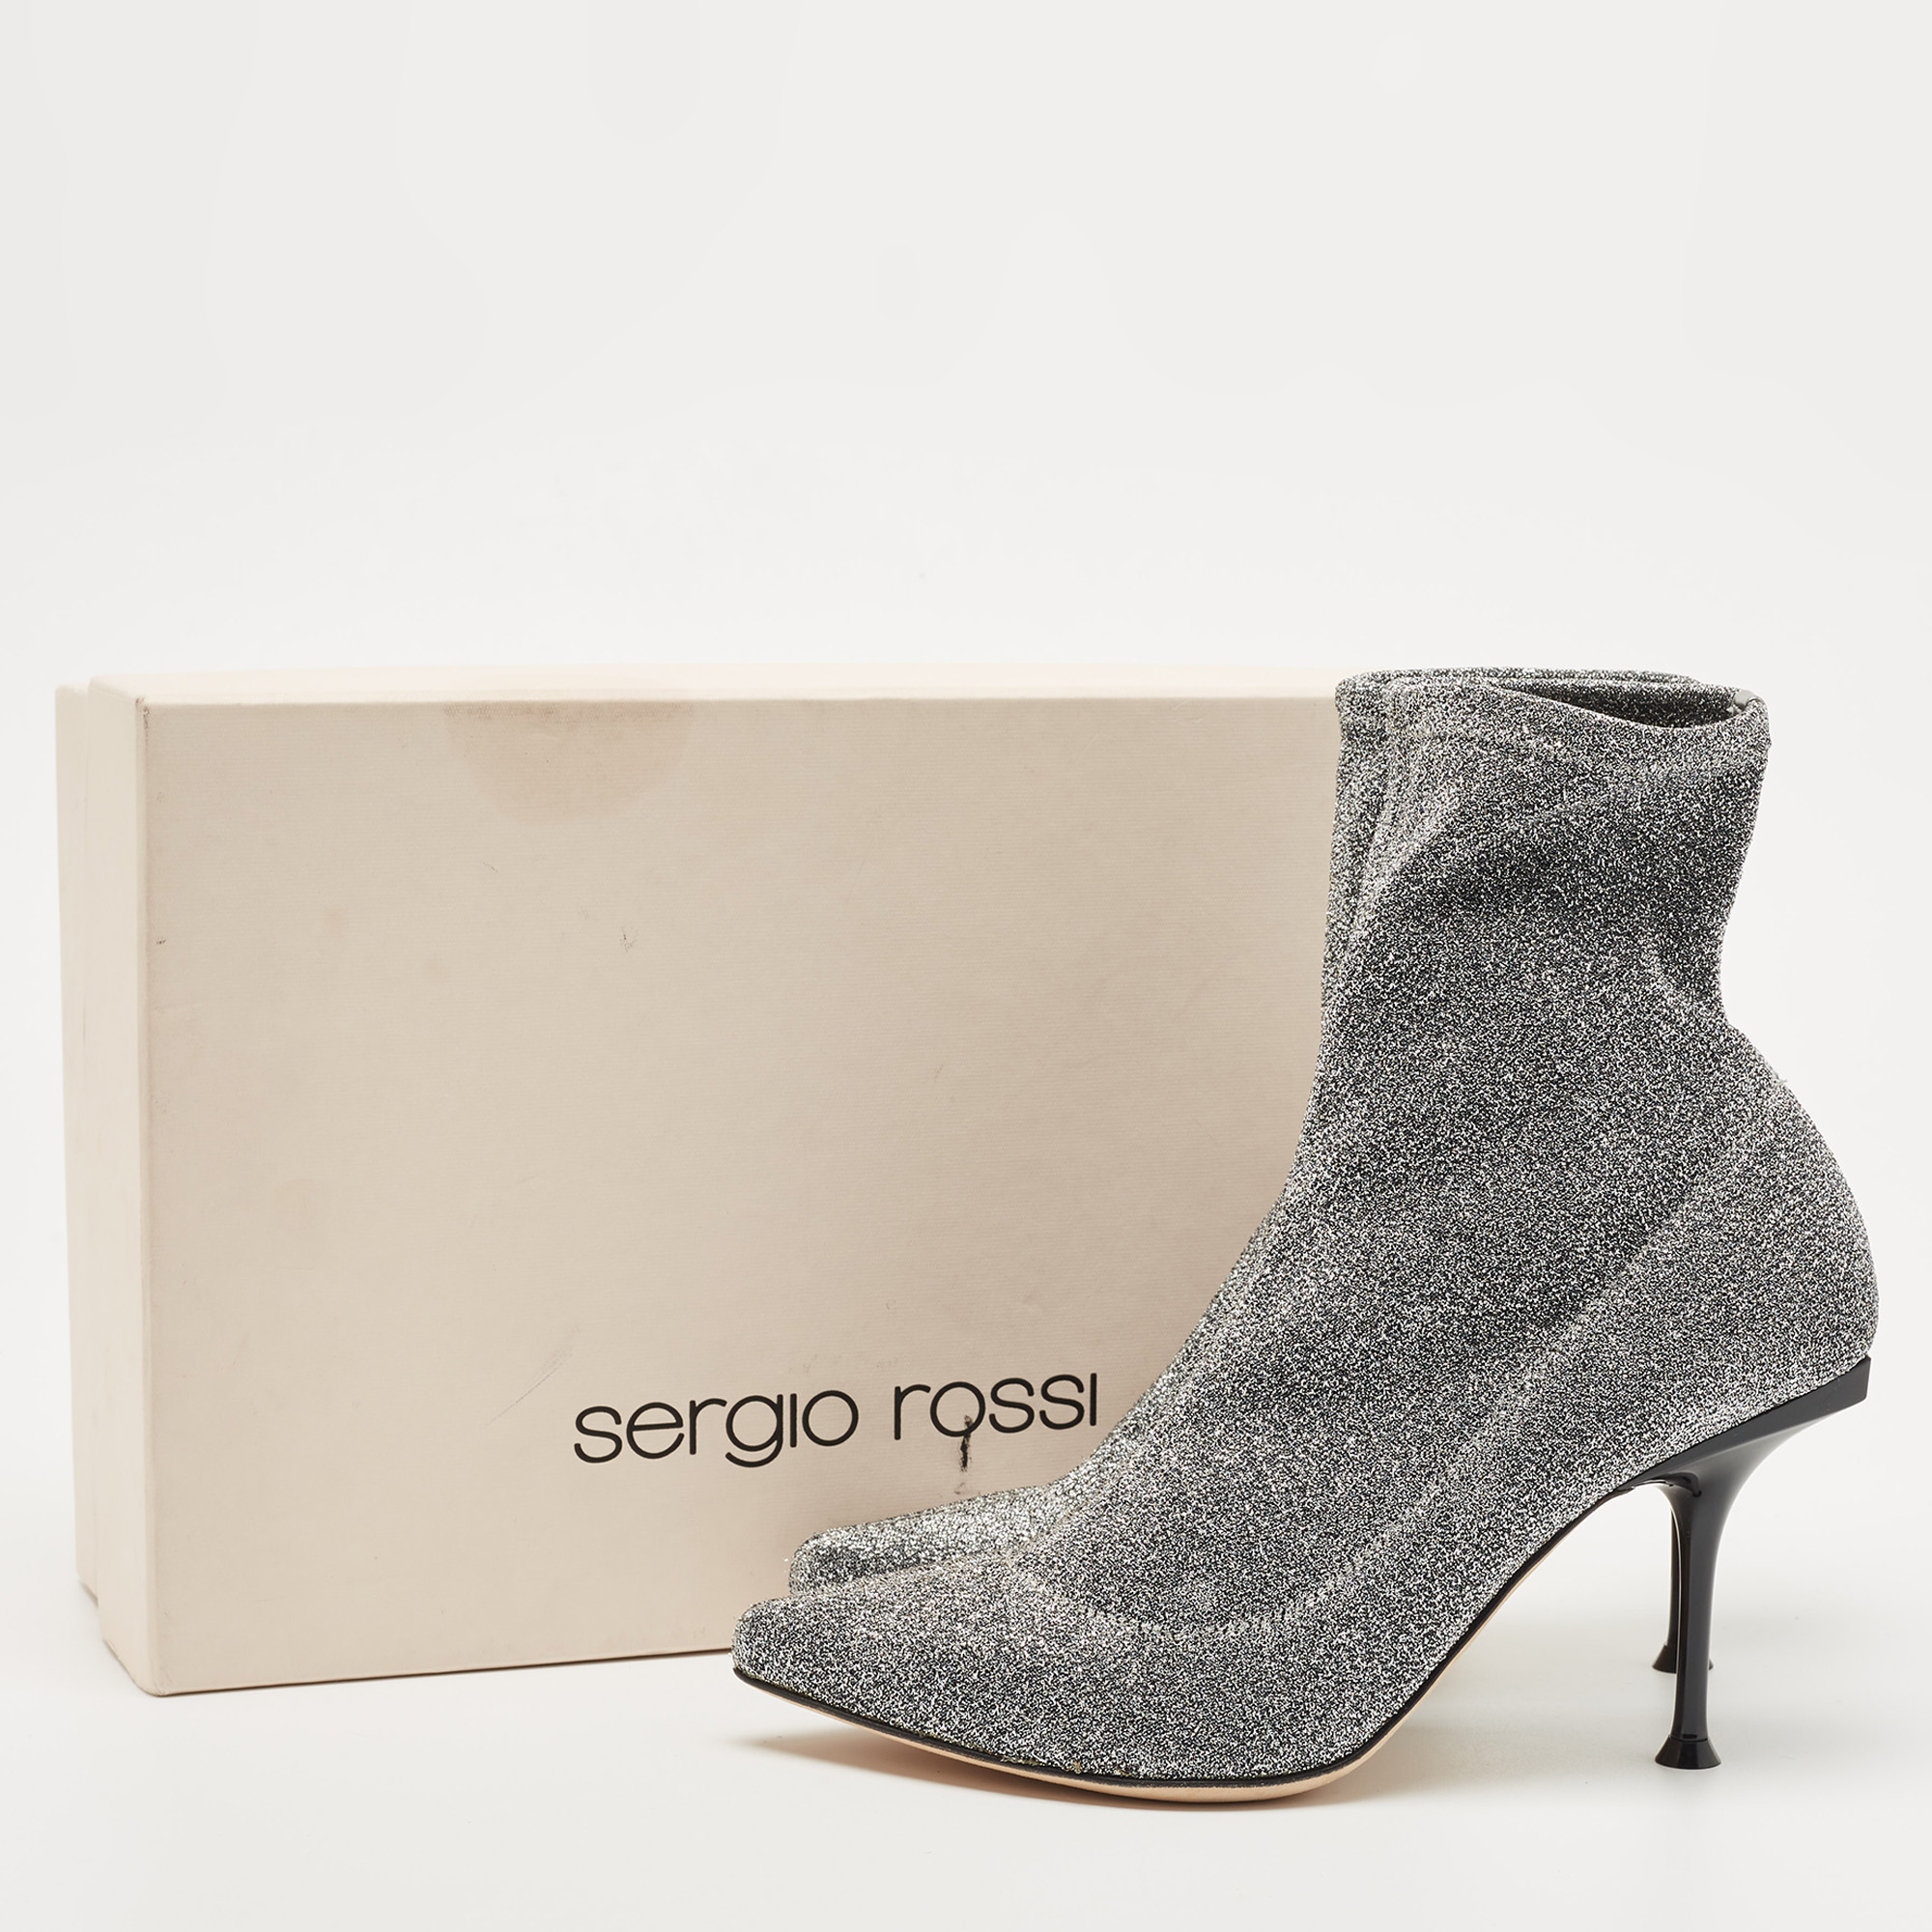 Sergio Rossi Metallic Silver Knit Fabric Pointed Toe Ankle Boots Size 36